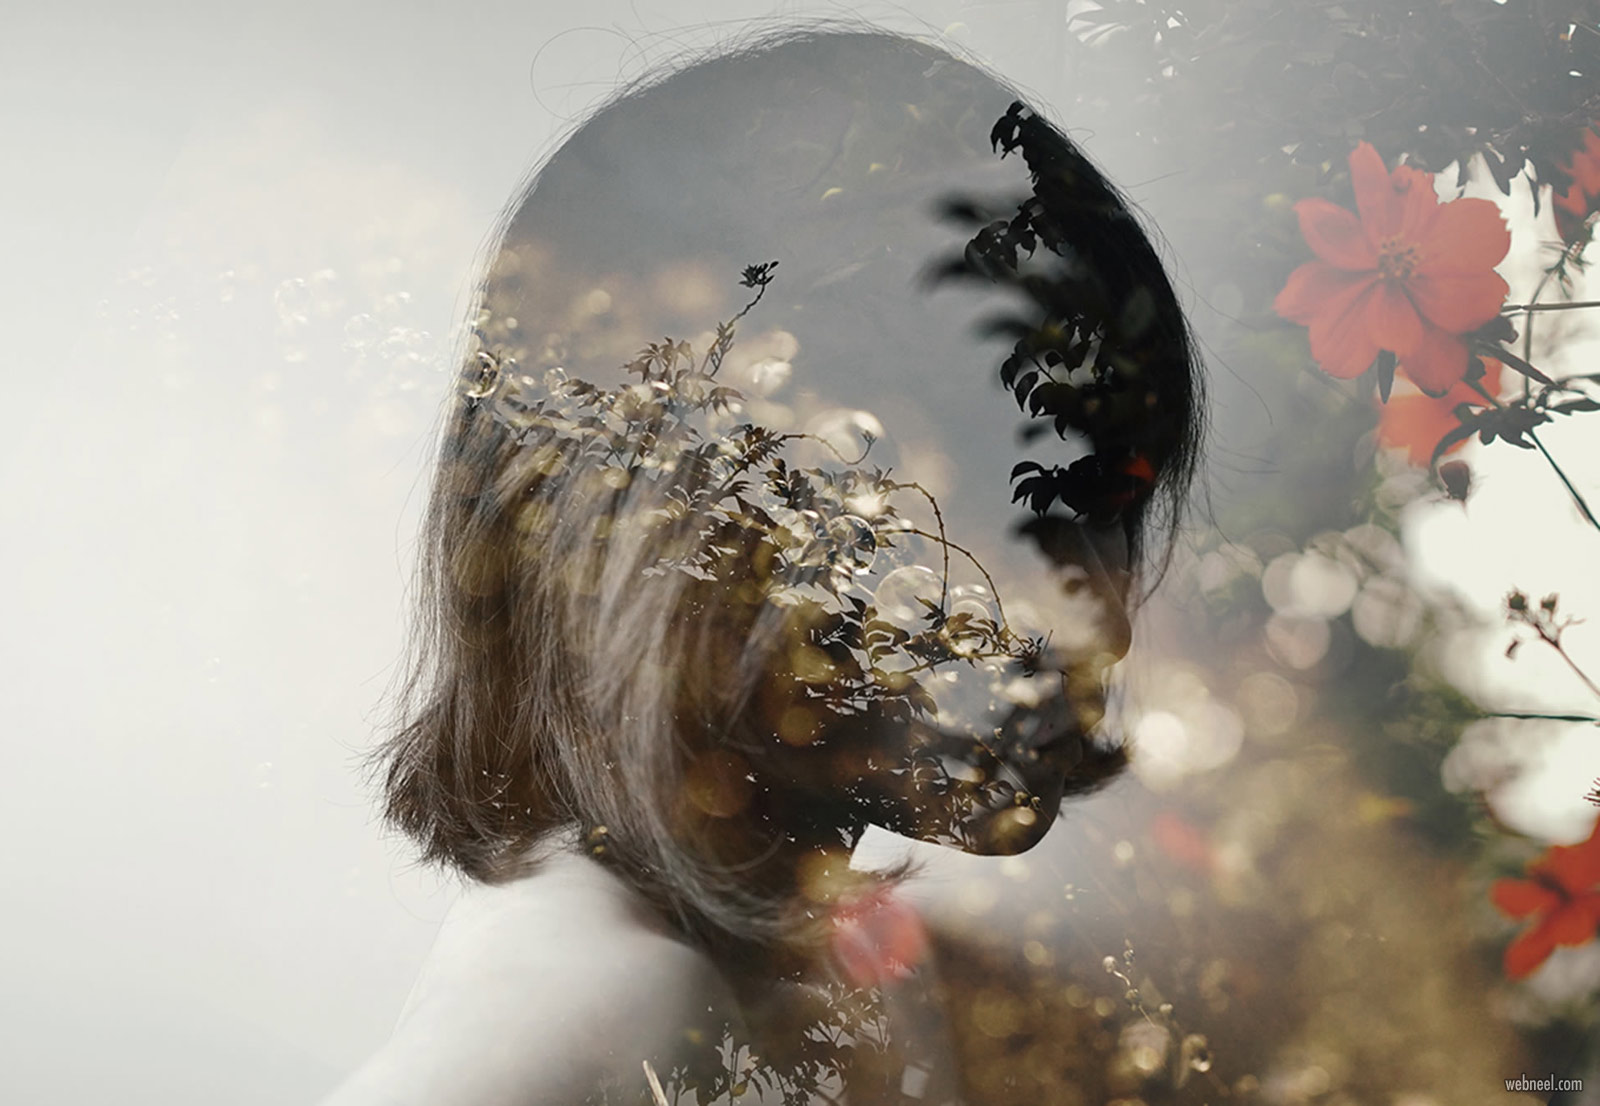 double exposure effect photo by miki takahashi